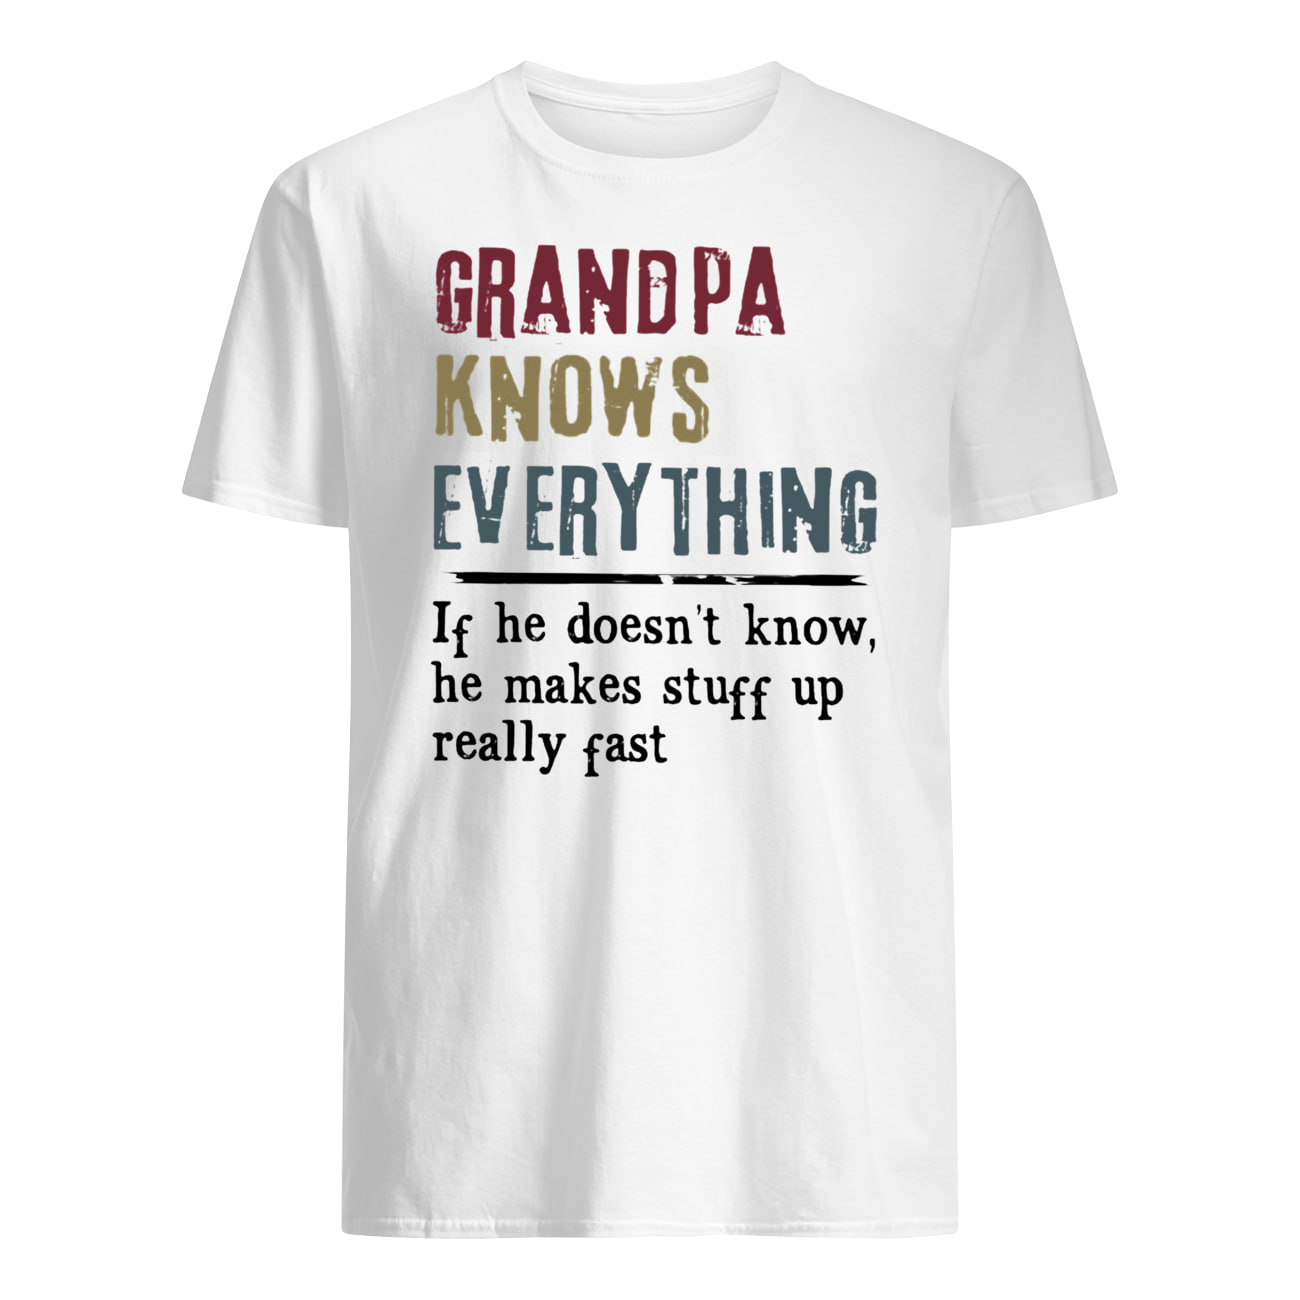 Grandpa knows everything if he doesn't know mens shirt